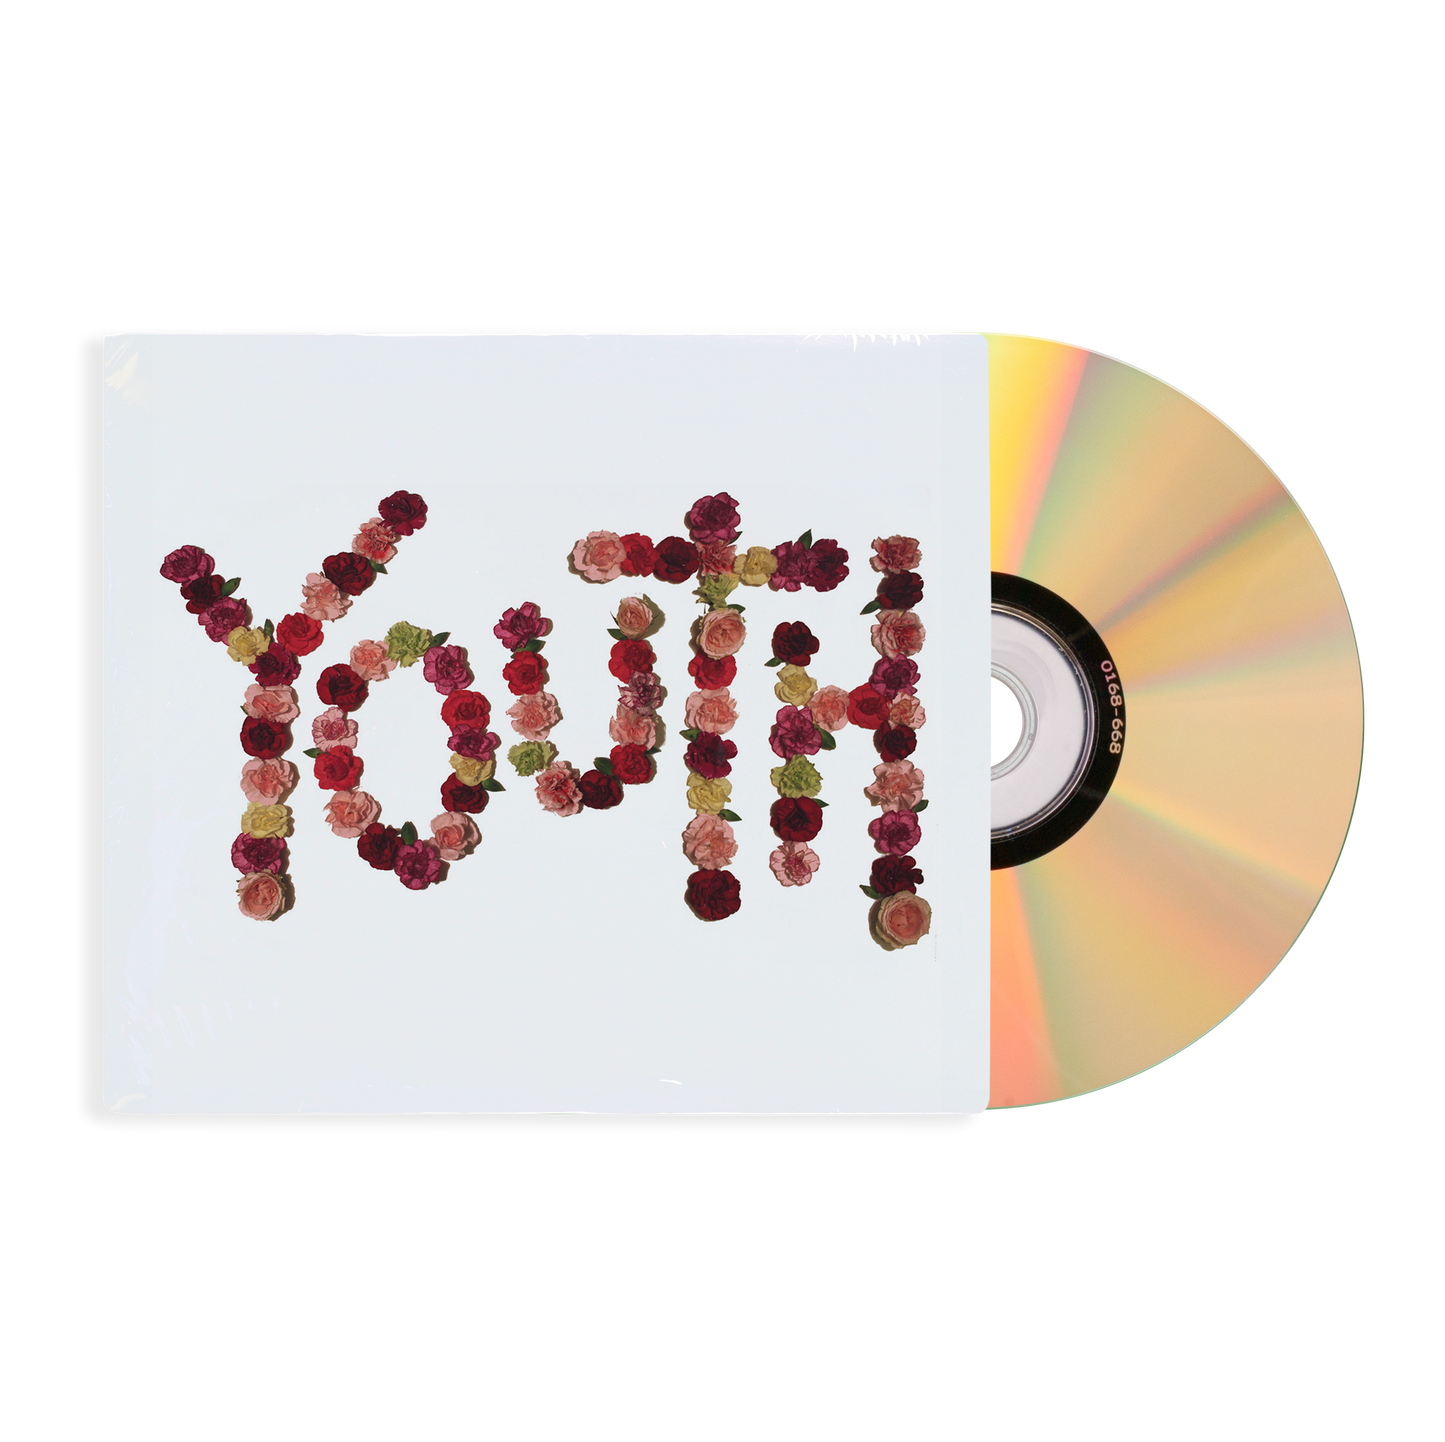 Citizen  "Youth" CD